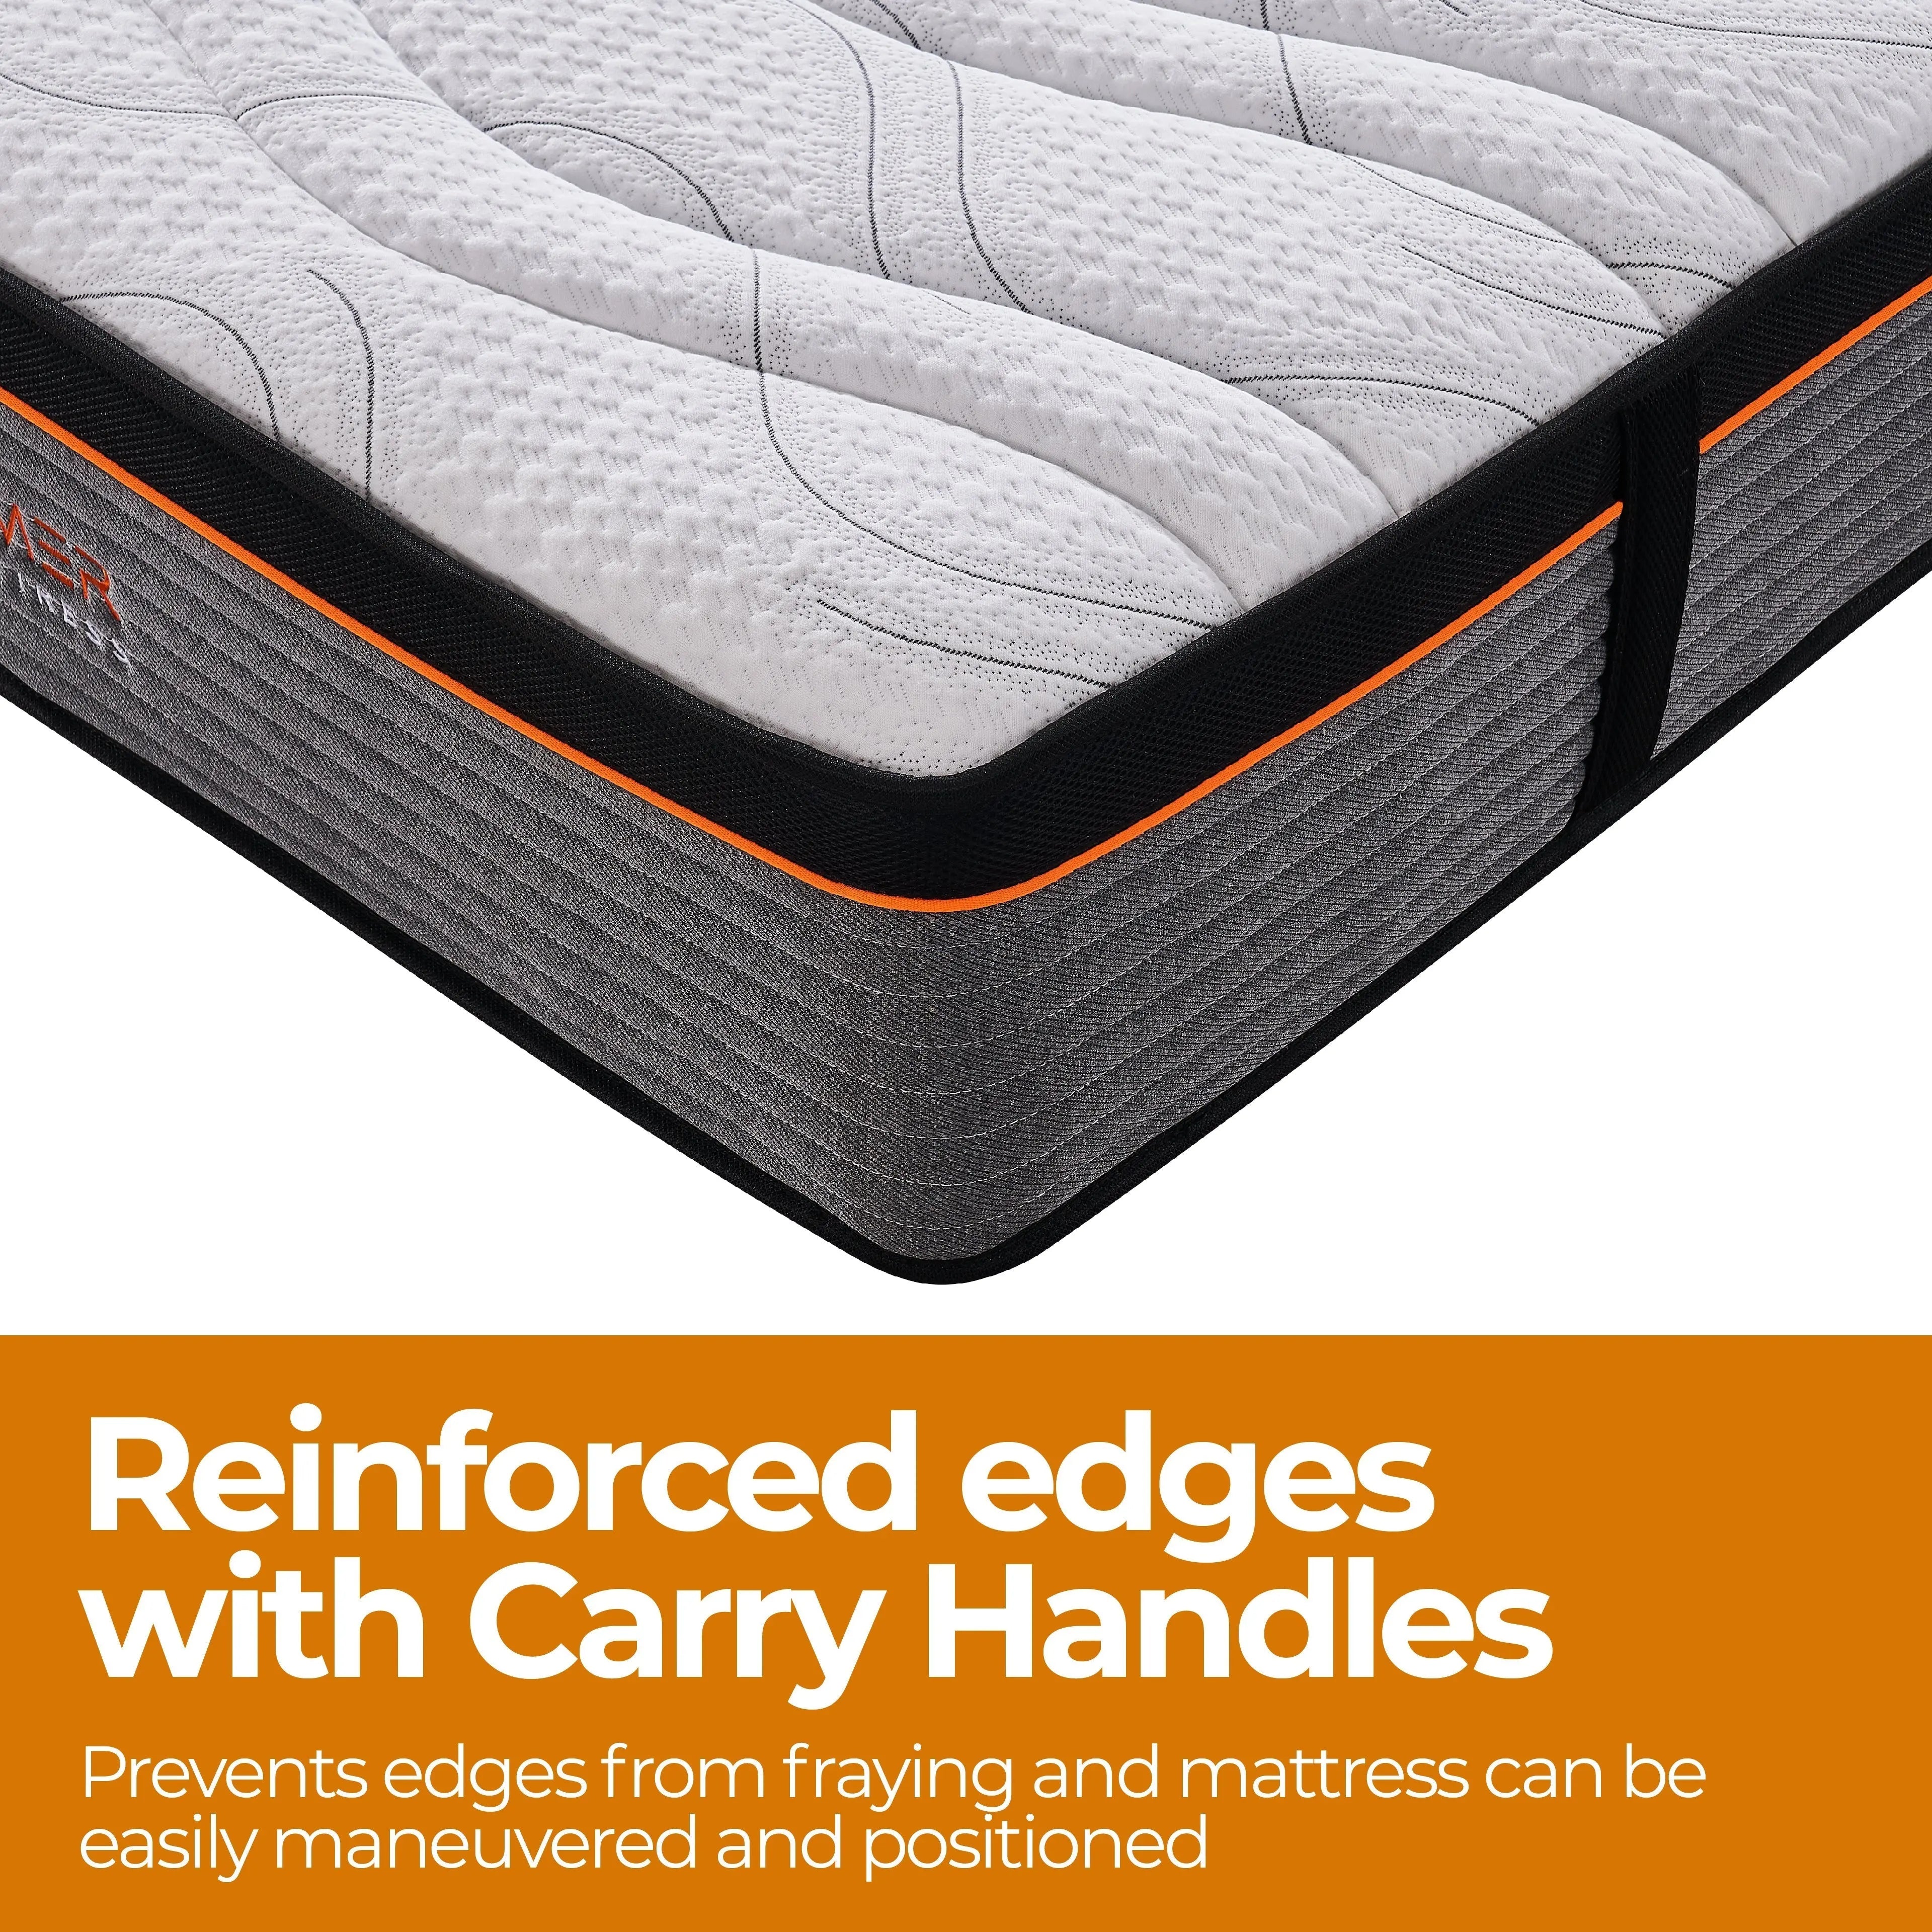 EasyDreamer Orthopaedic Euro Top Pocket Spring Single Mattress from Deals499 at Deals499